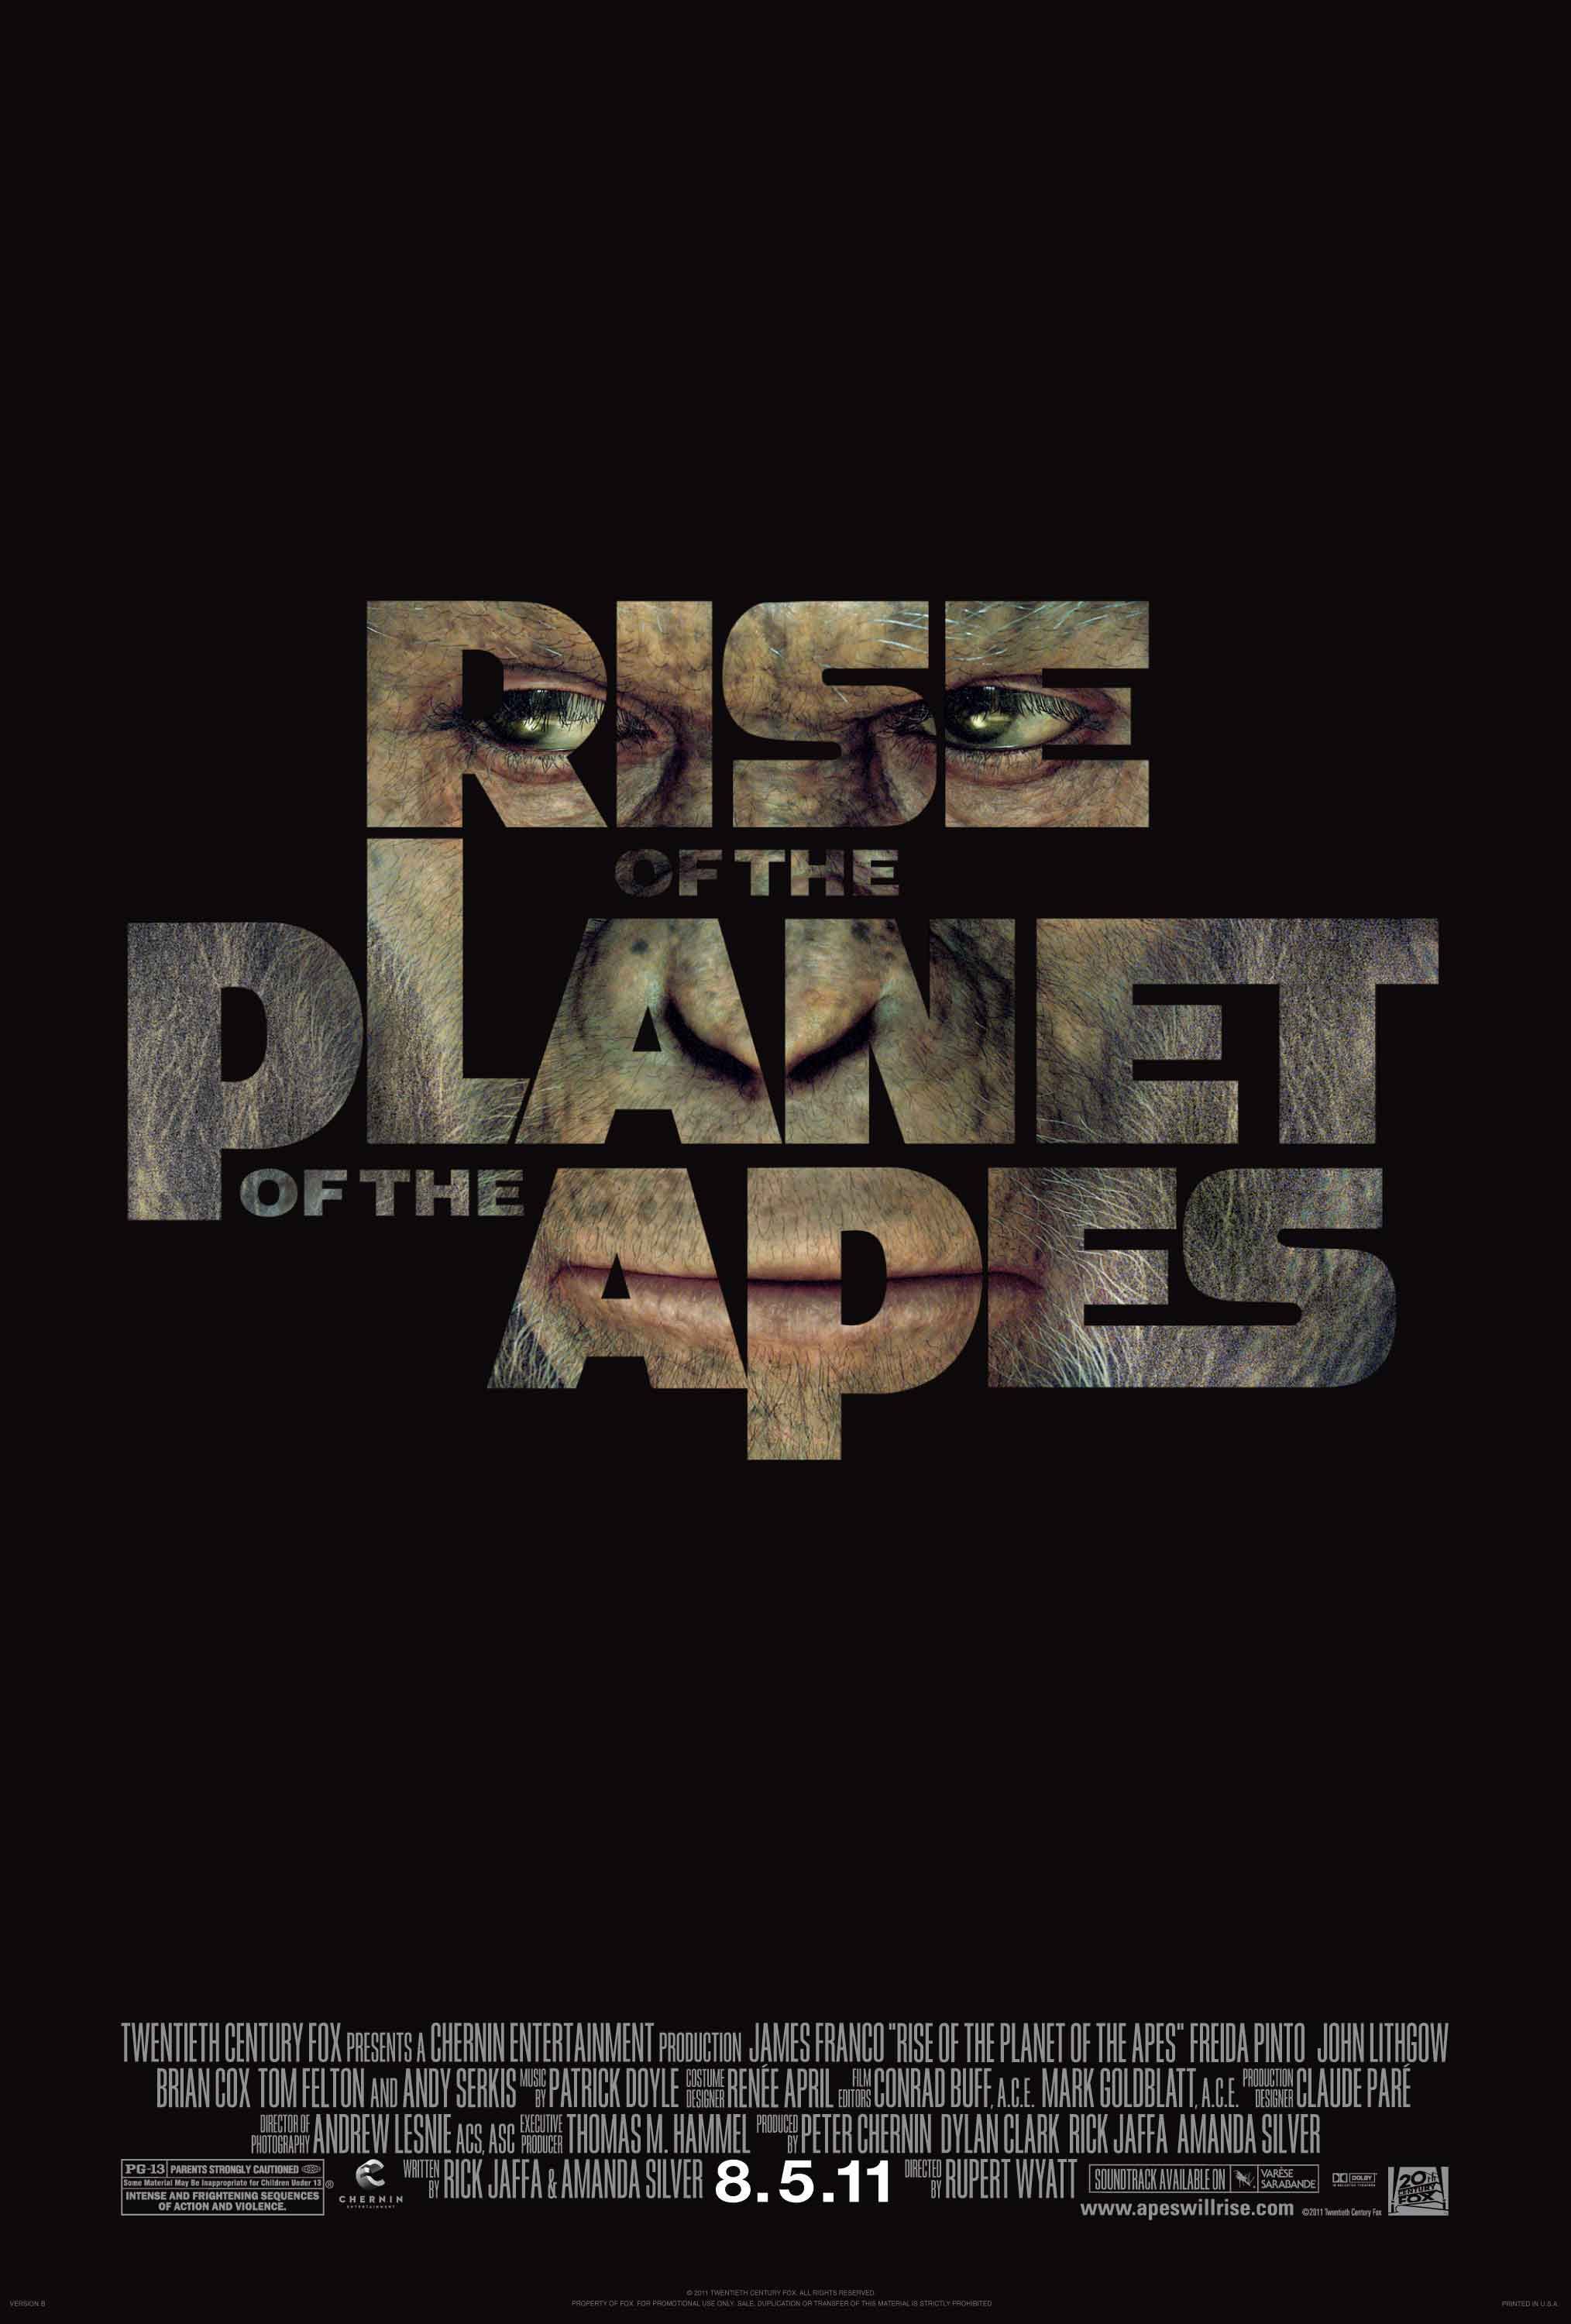 rise-of-the-planet-of-the-apes-movie-poster-01.jpg